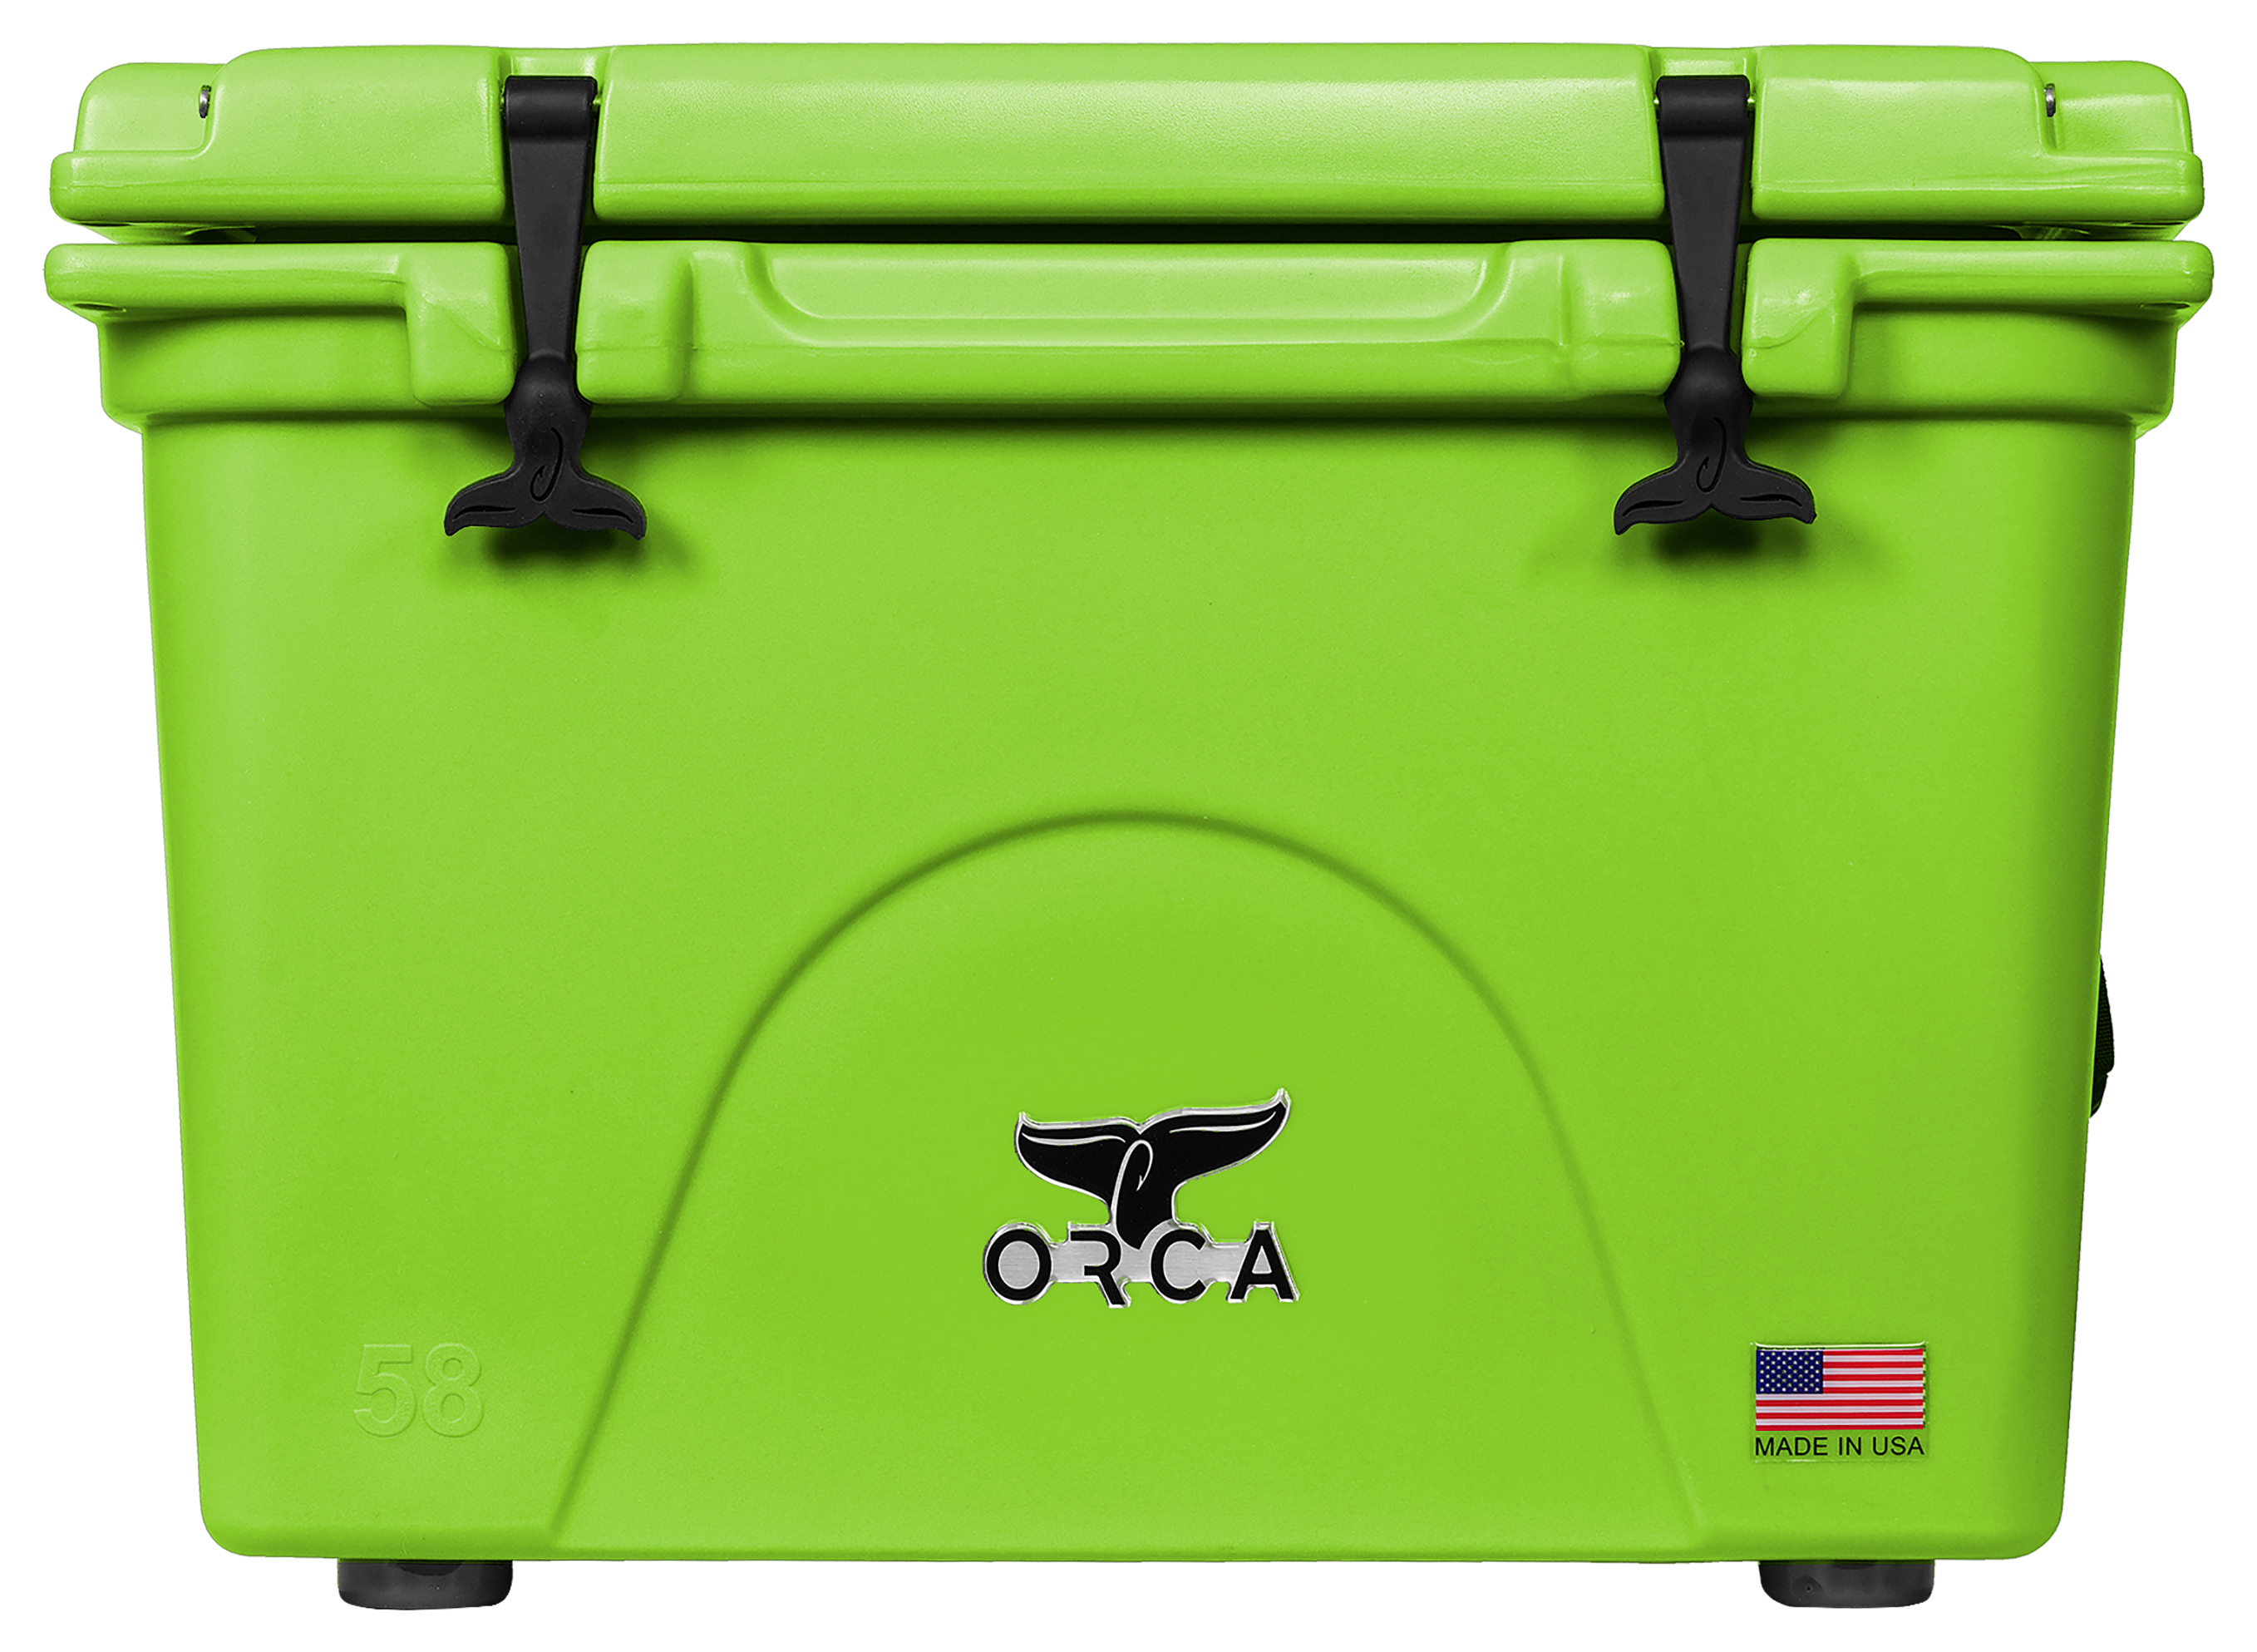 Orca Coolers are now available at Farmers Coop in Mena, Arkansas!